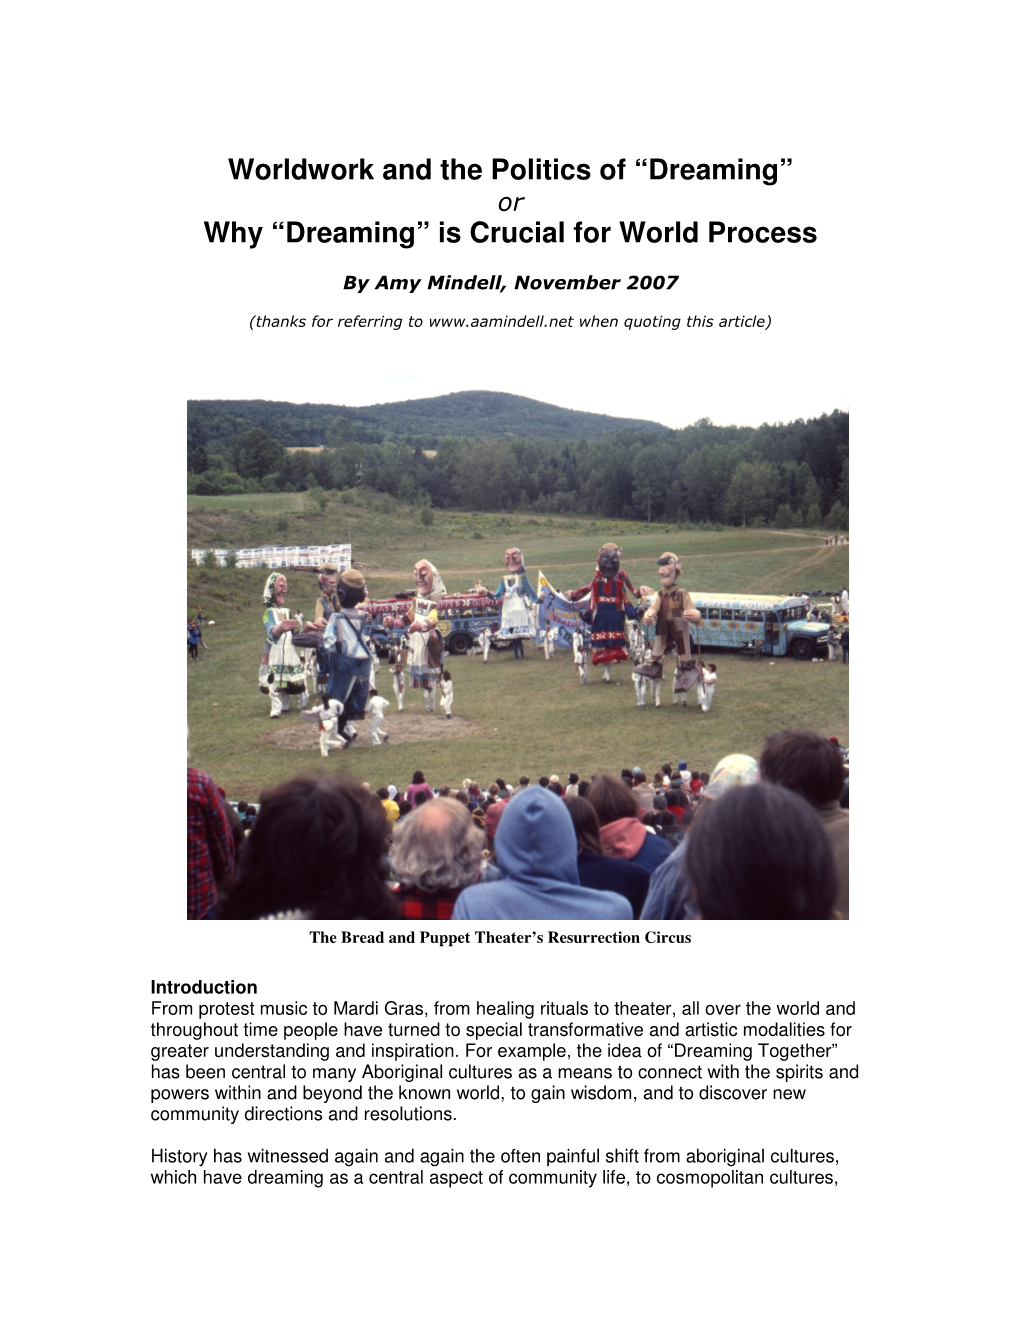 Worldwork and the Politics of “Dreaming” Why “Dreaming” Is